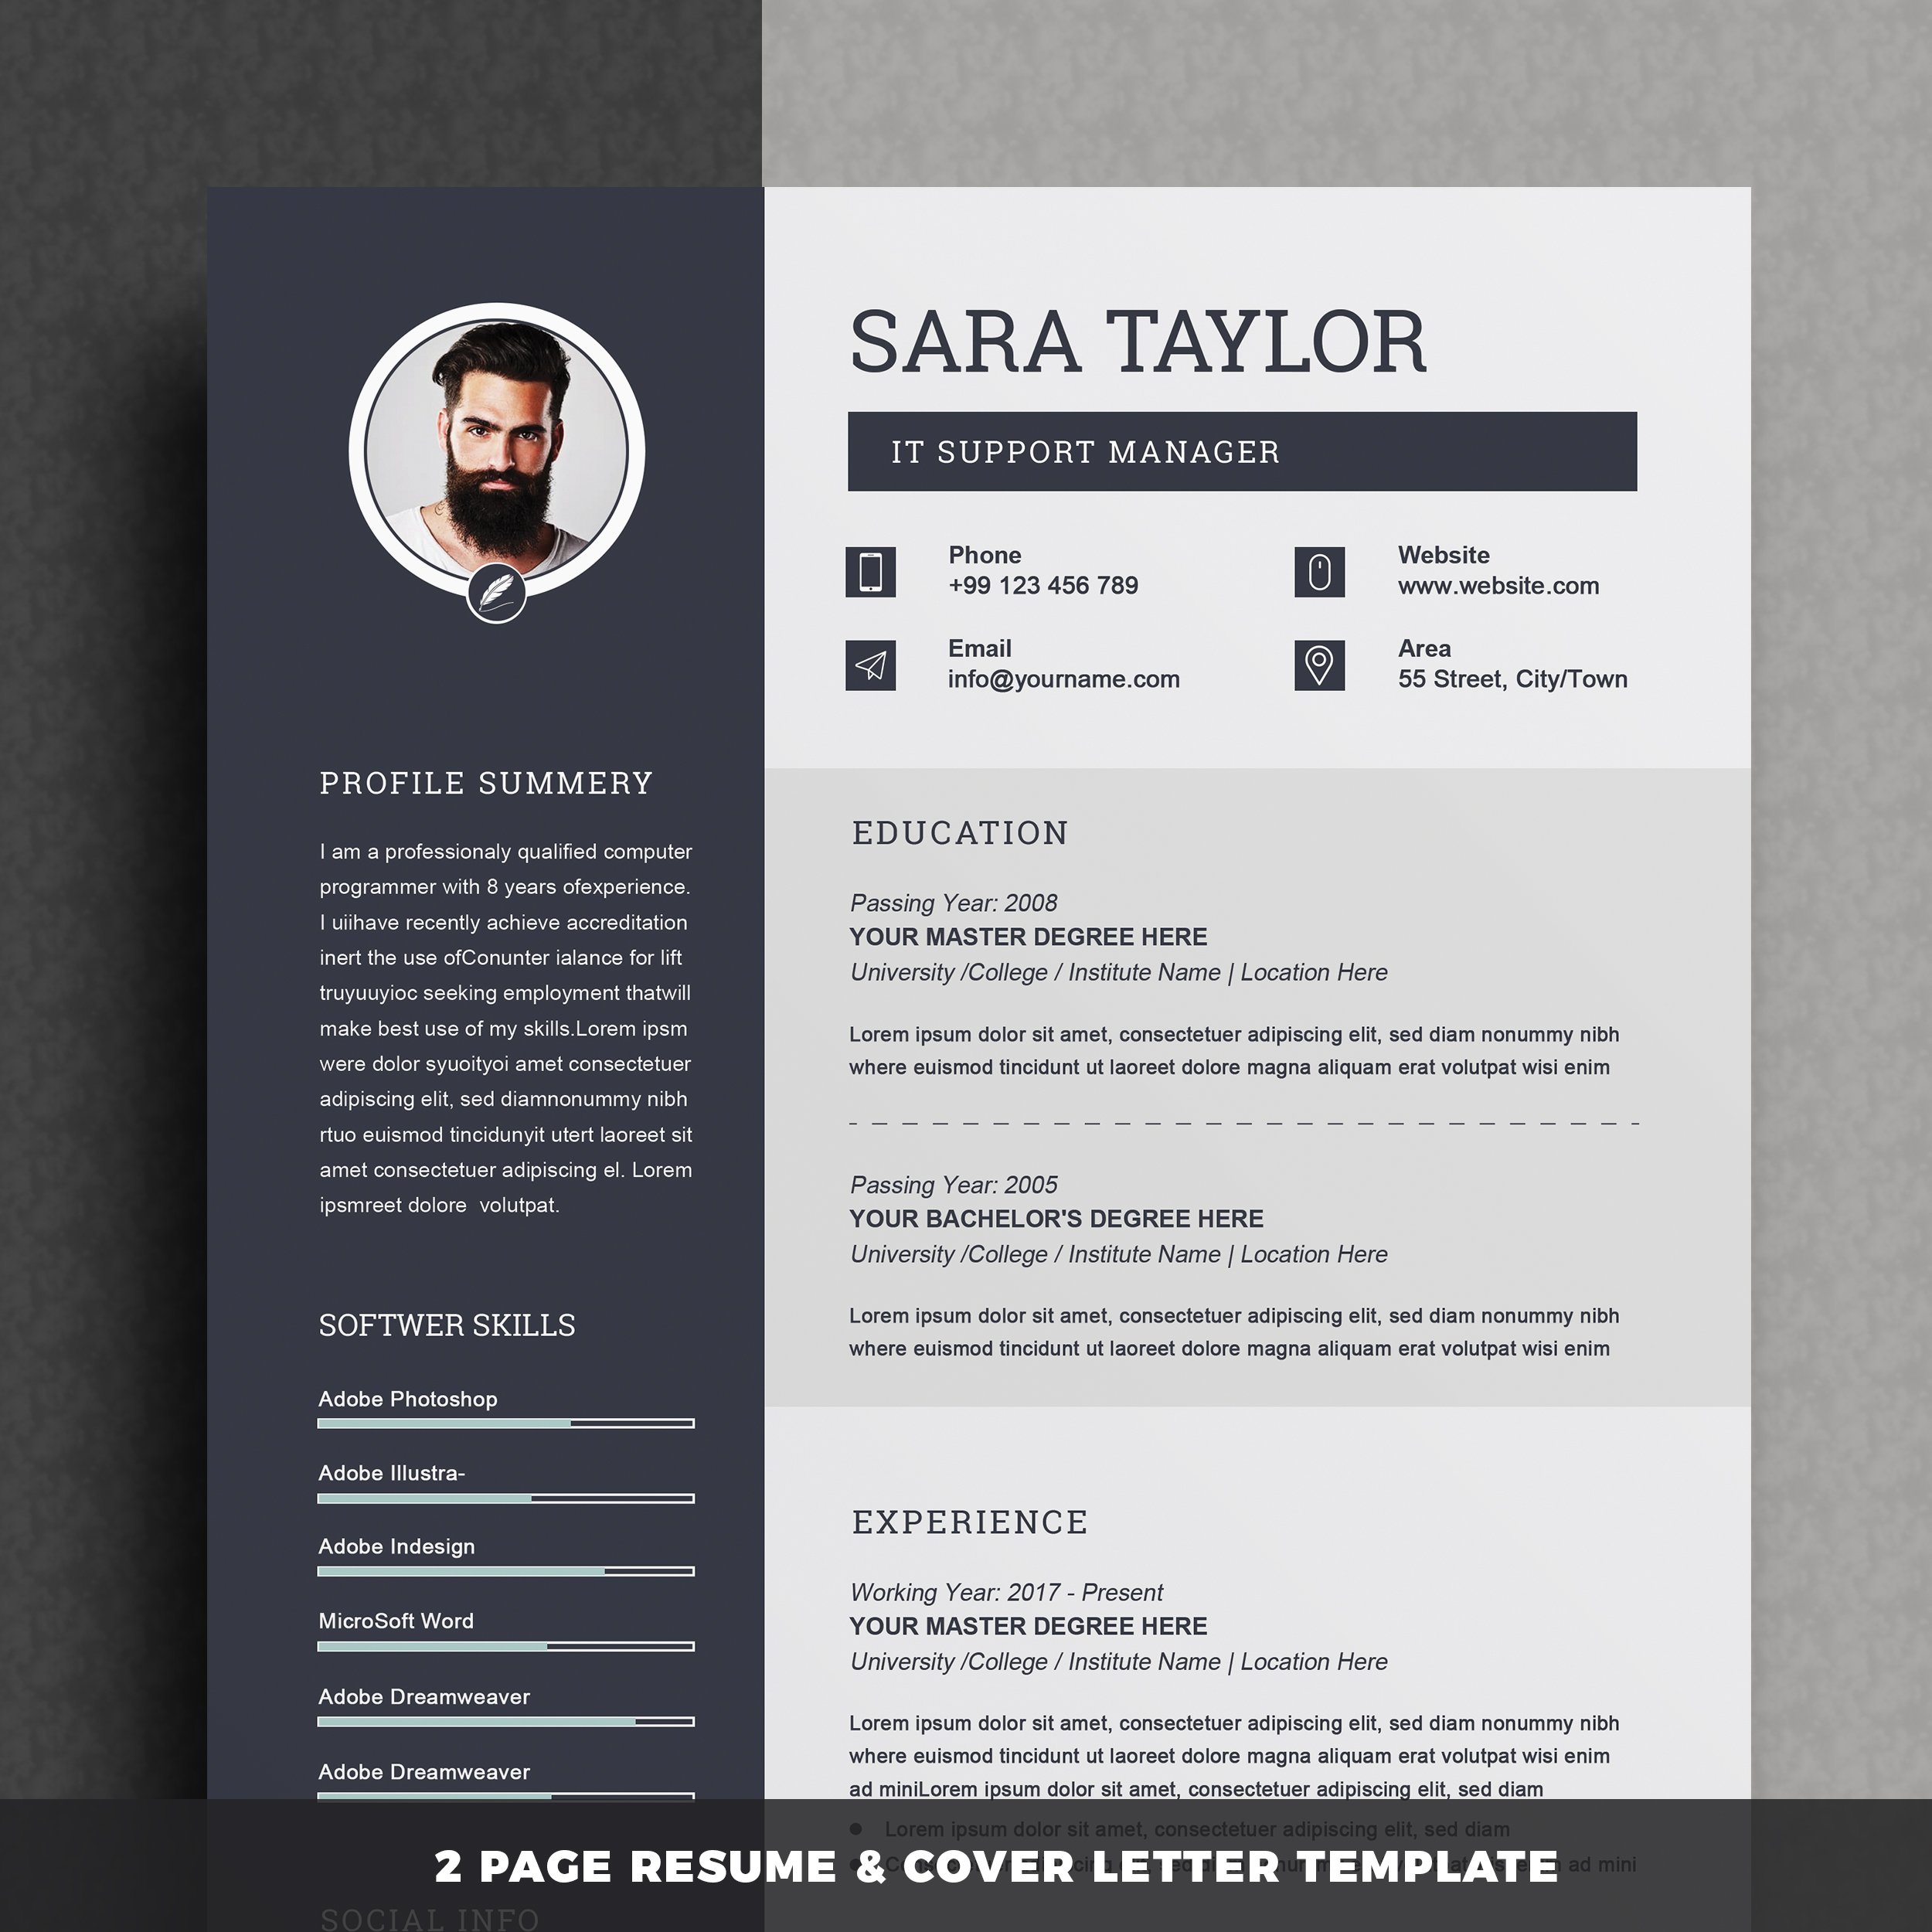 Professional resume template with a dark background.